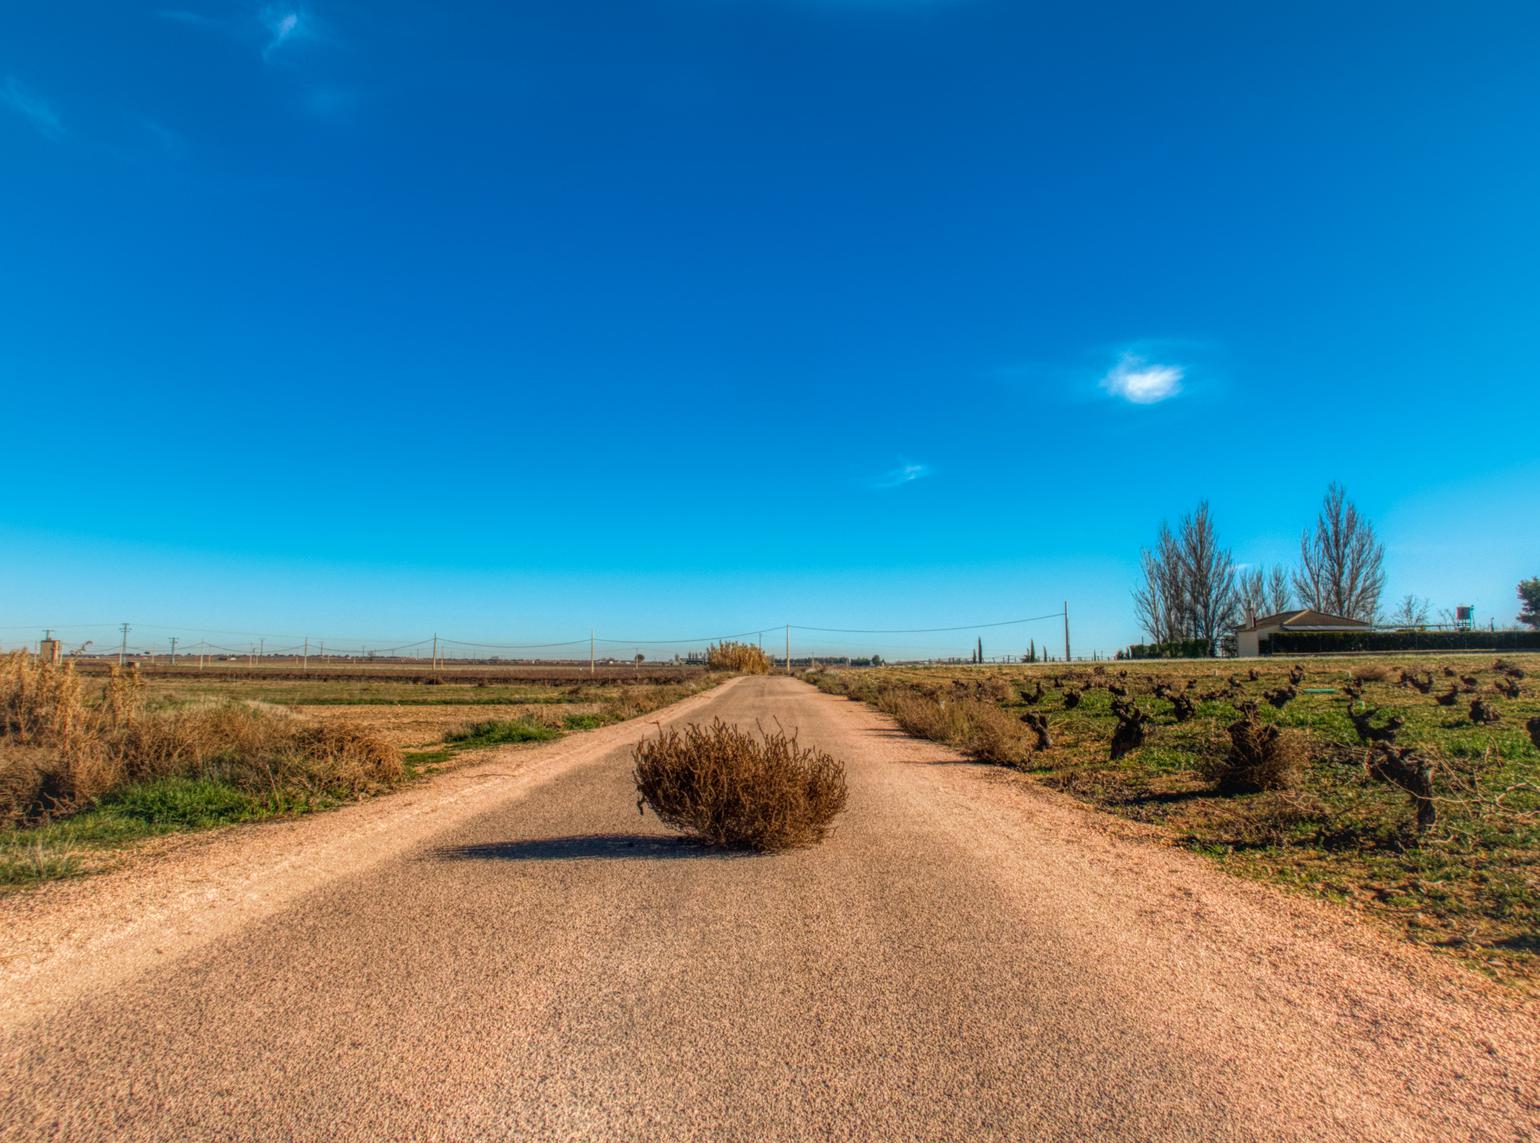 A road with tumbleweed